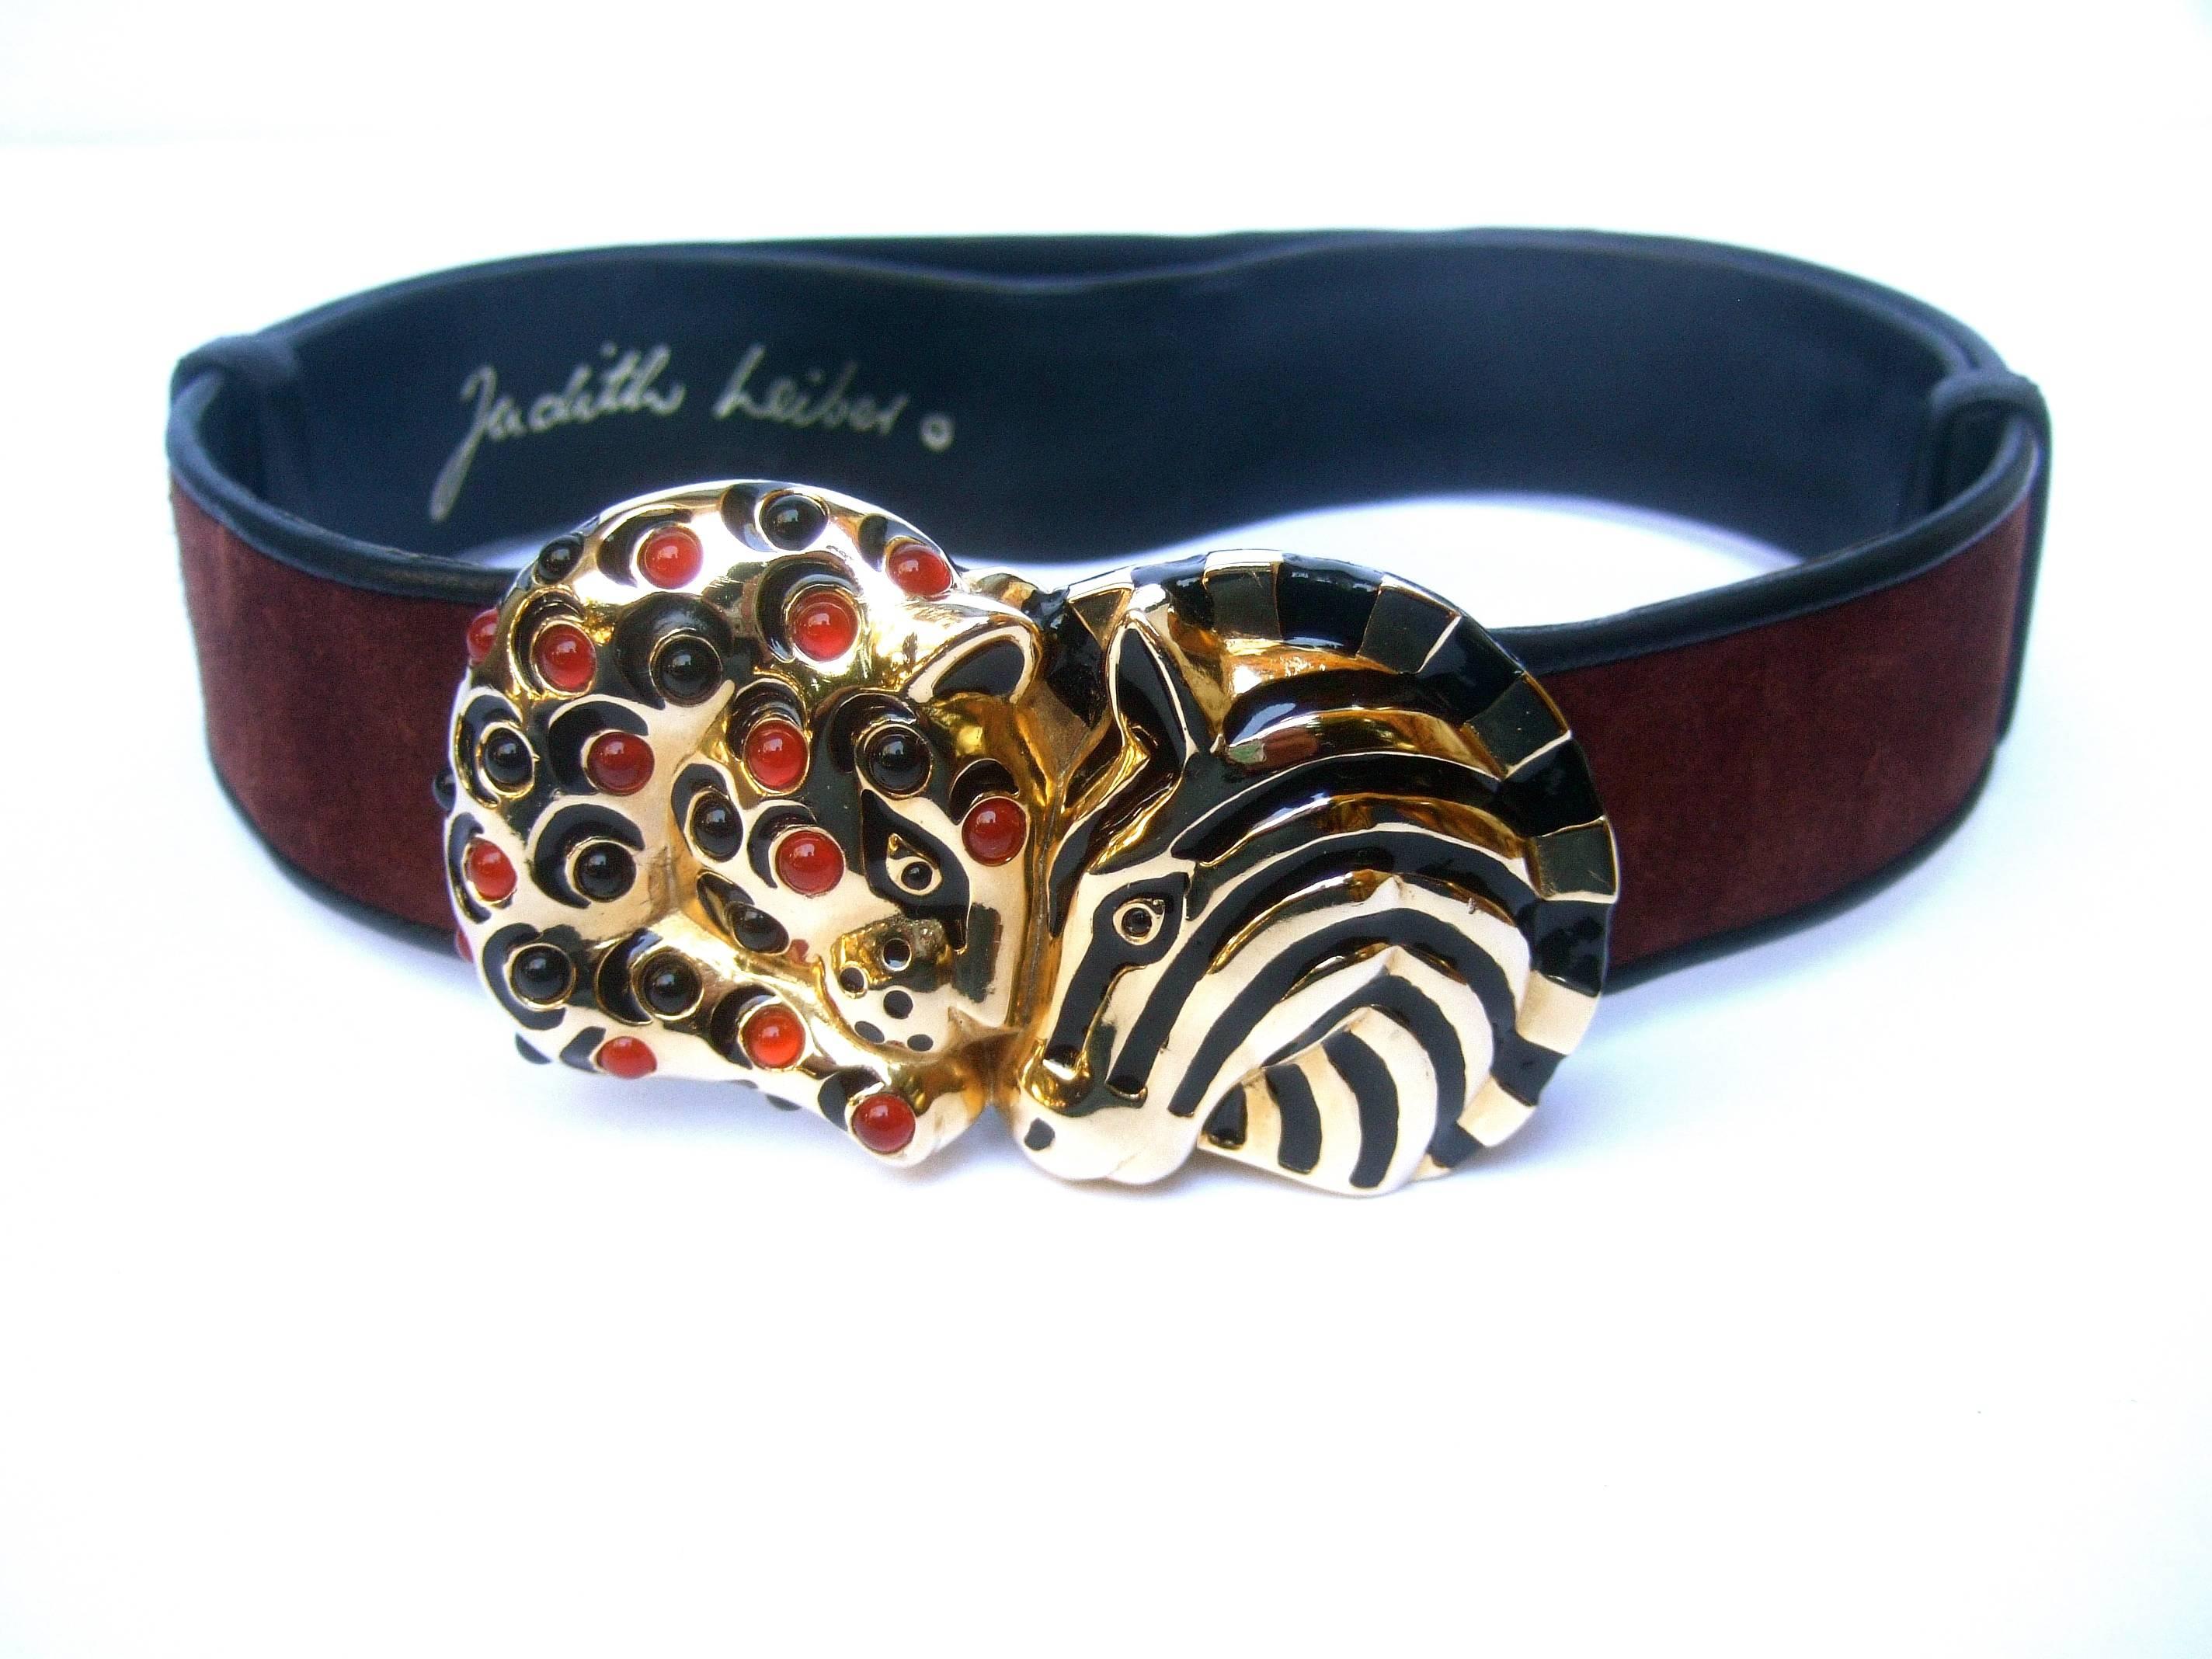 Judith Leiber Jeweled Jungle Animal Brown Suede Belt in J.L. Box 2